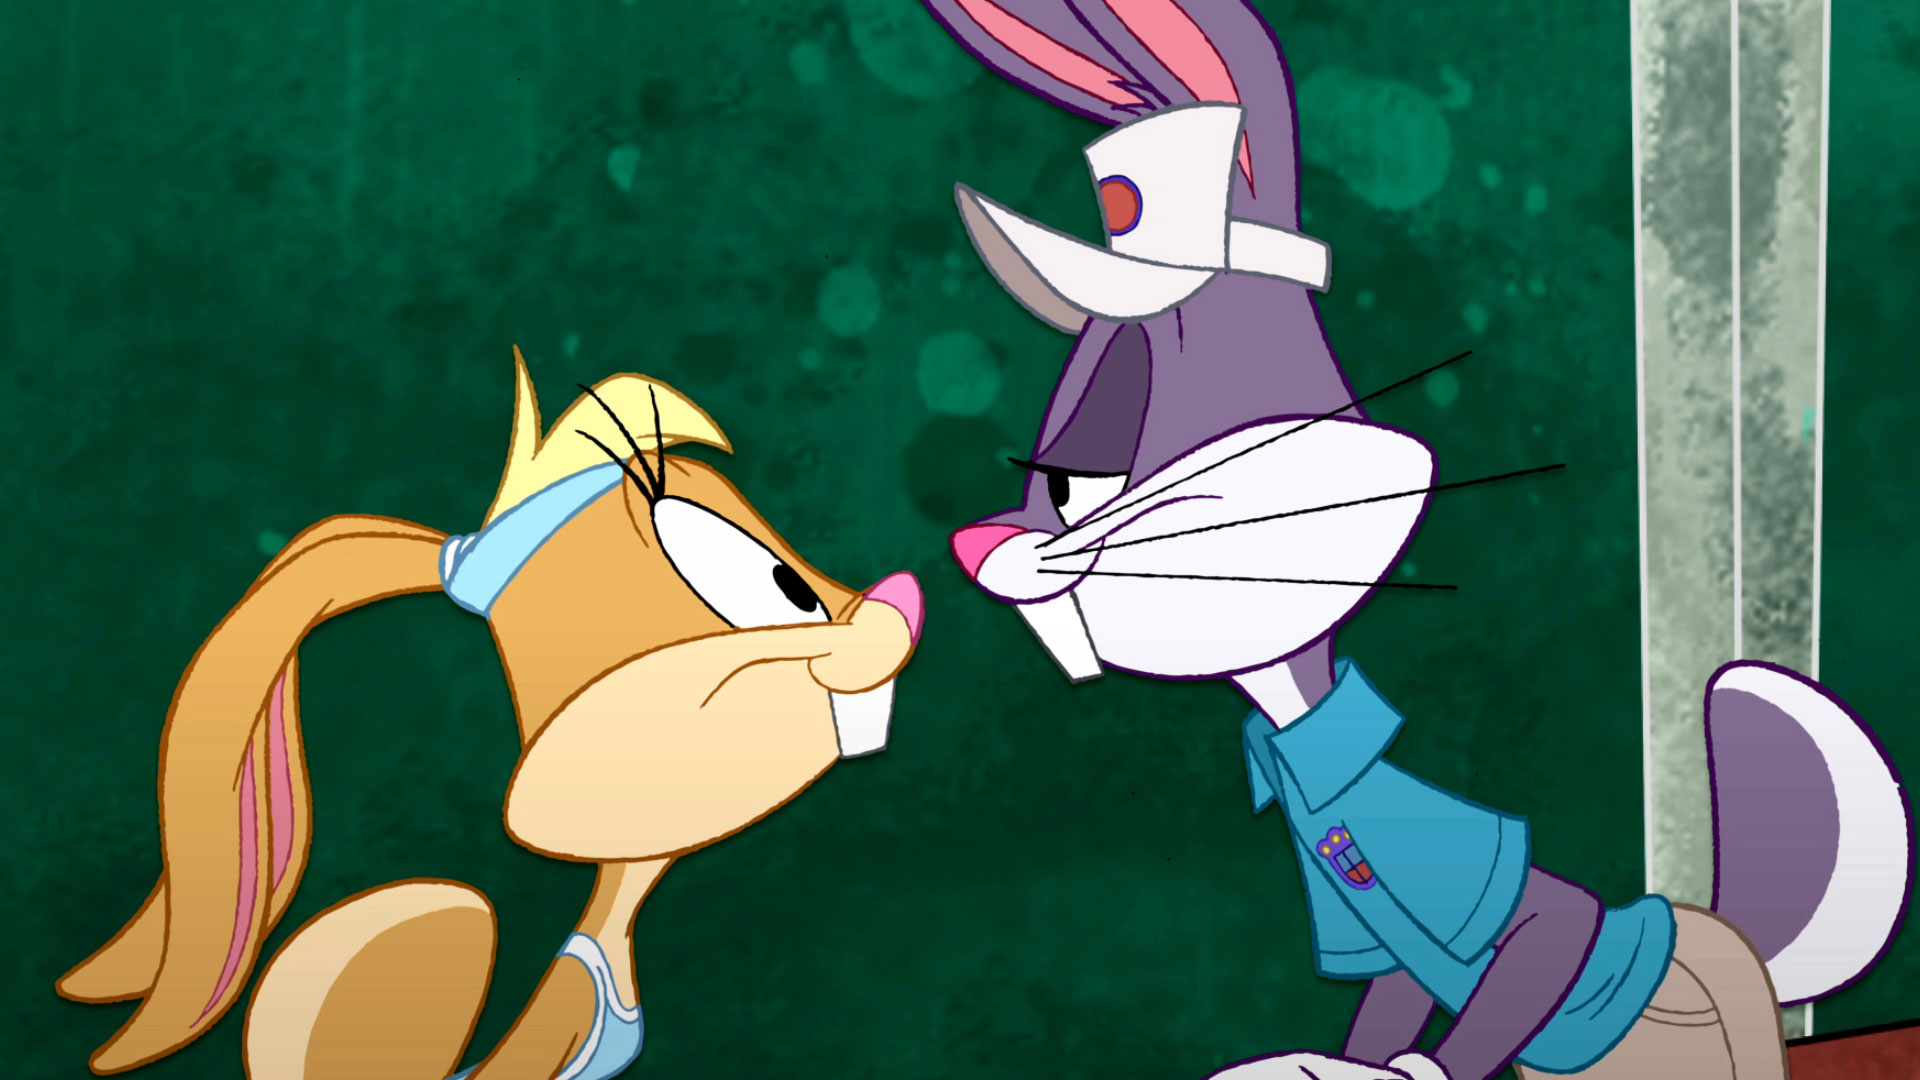 "The Looney Tunes Show": A Misleading Show Name.